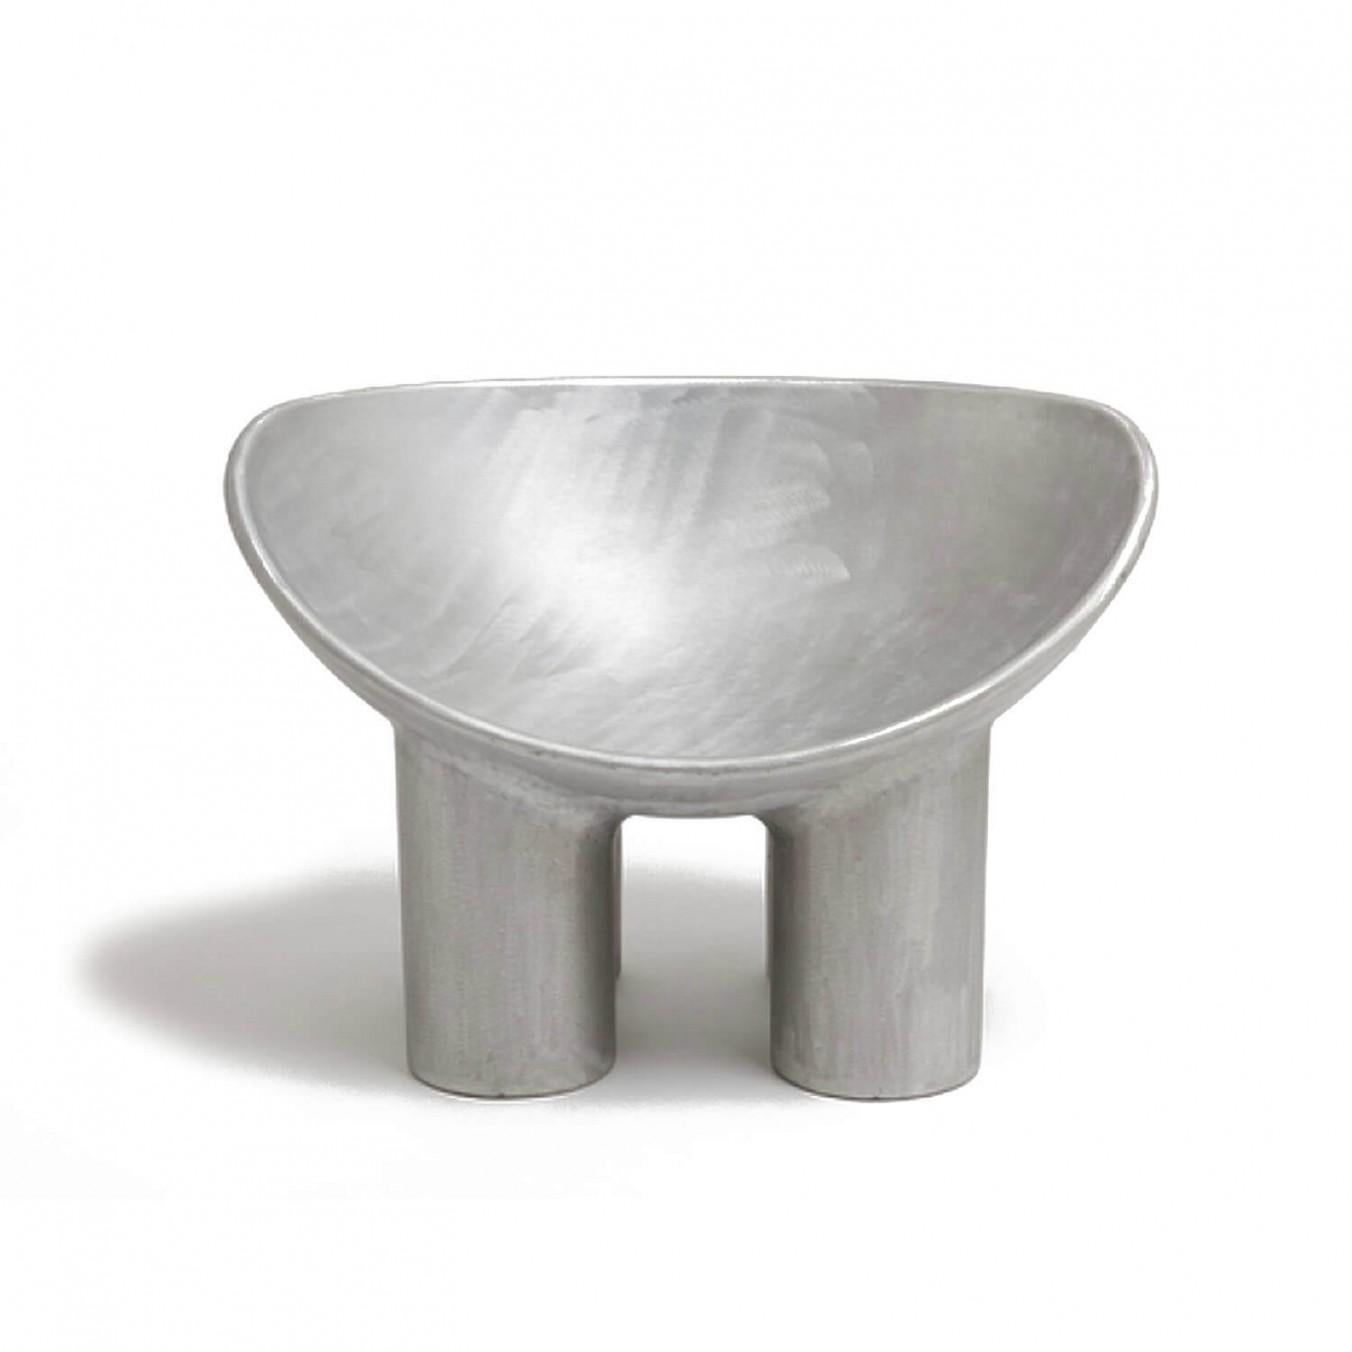 Design: Faye Toogood
Material: Aluminium
60 kg

The Roly Poly chair is the anchor piece of Faye Toogood’s Assemblage No. 4 collection. This scoop seated chair with four plump legs is made from material that suggests a certain rawness. Assemblage